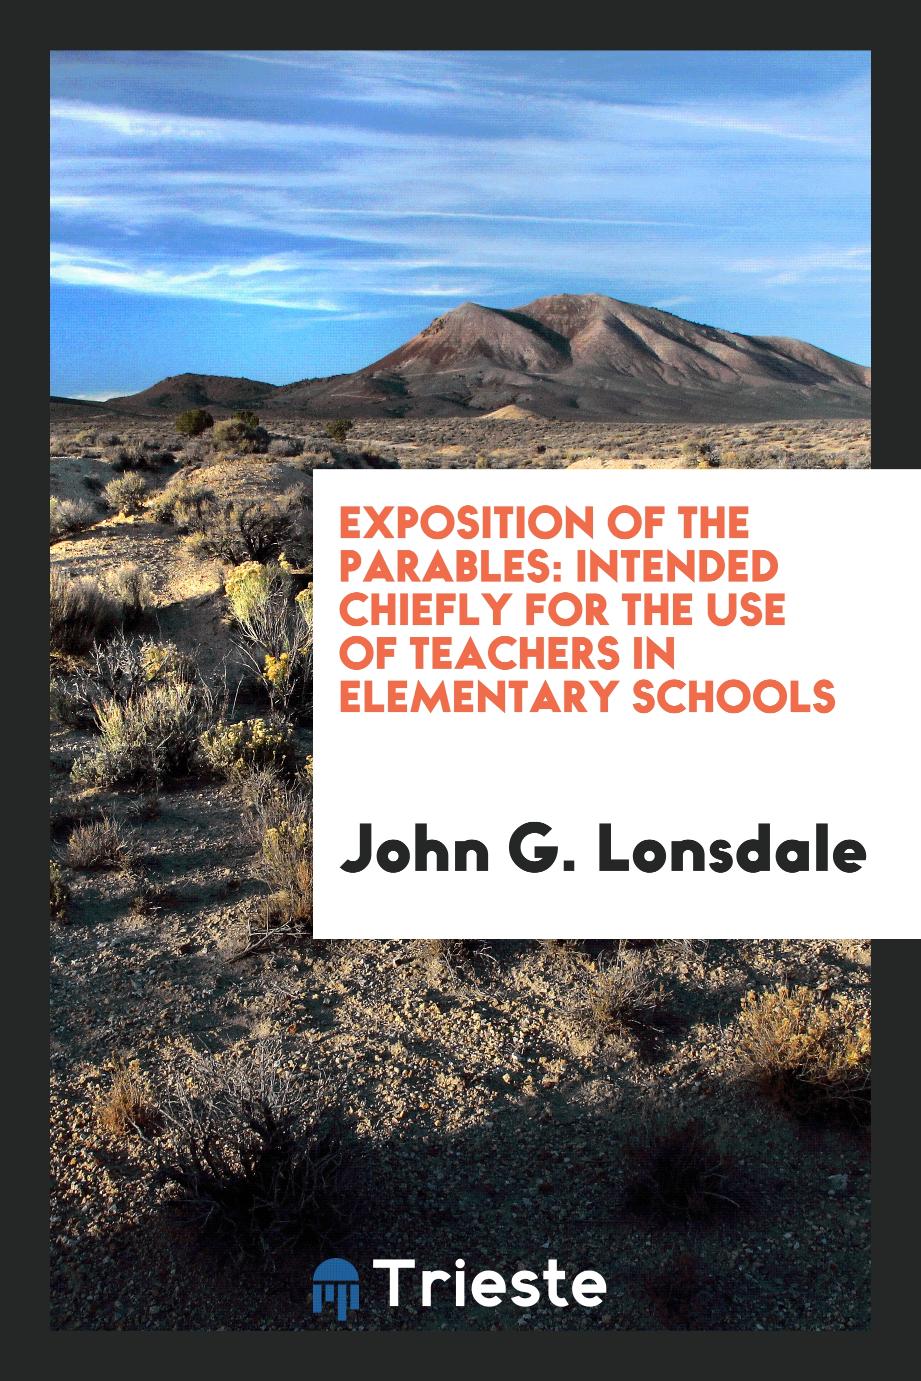 Exposition of the Parables: Intended Chiefly for the Use of Teachers in Elementary Schools